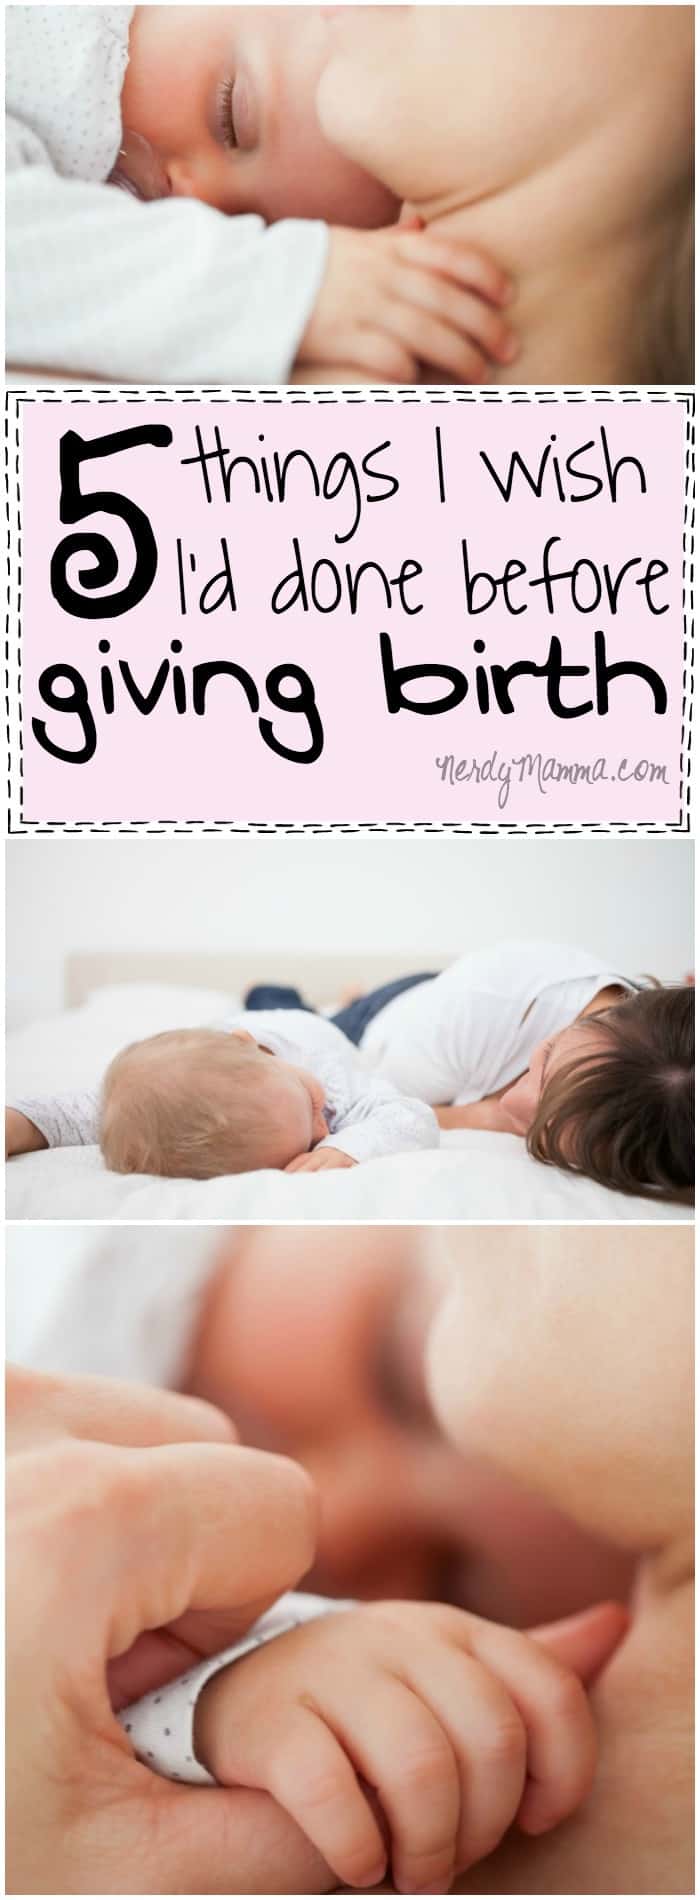 I wasn't prepared either before I had my first! And I'd definitely have appreciated a refresher for my second. I love these 5 tips for what to do before you give birth. Brilliant!